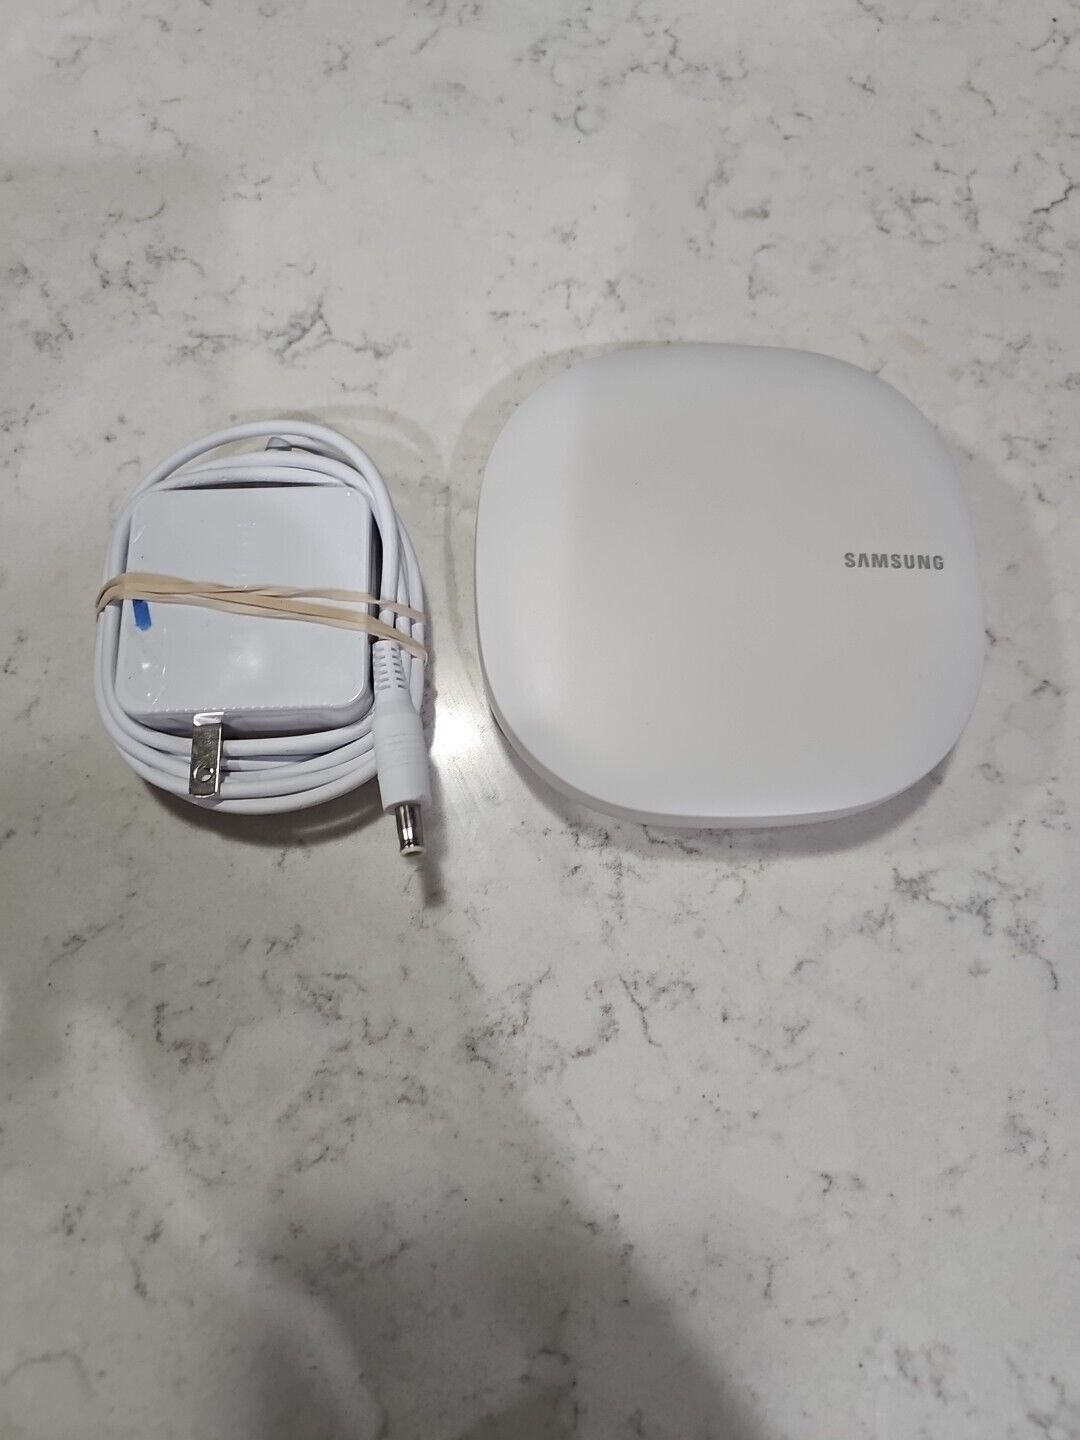 Samsung Connect Home Smart Home Hub Wi-fi System ET-WV520 AC1300 2.4 5 GHz Mesh